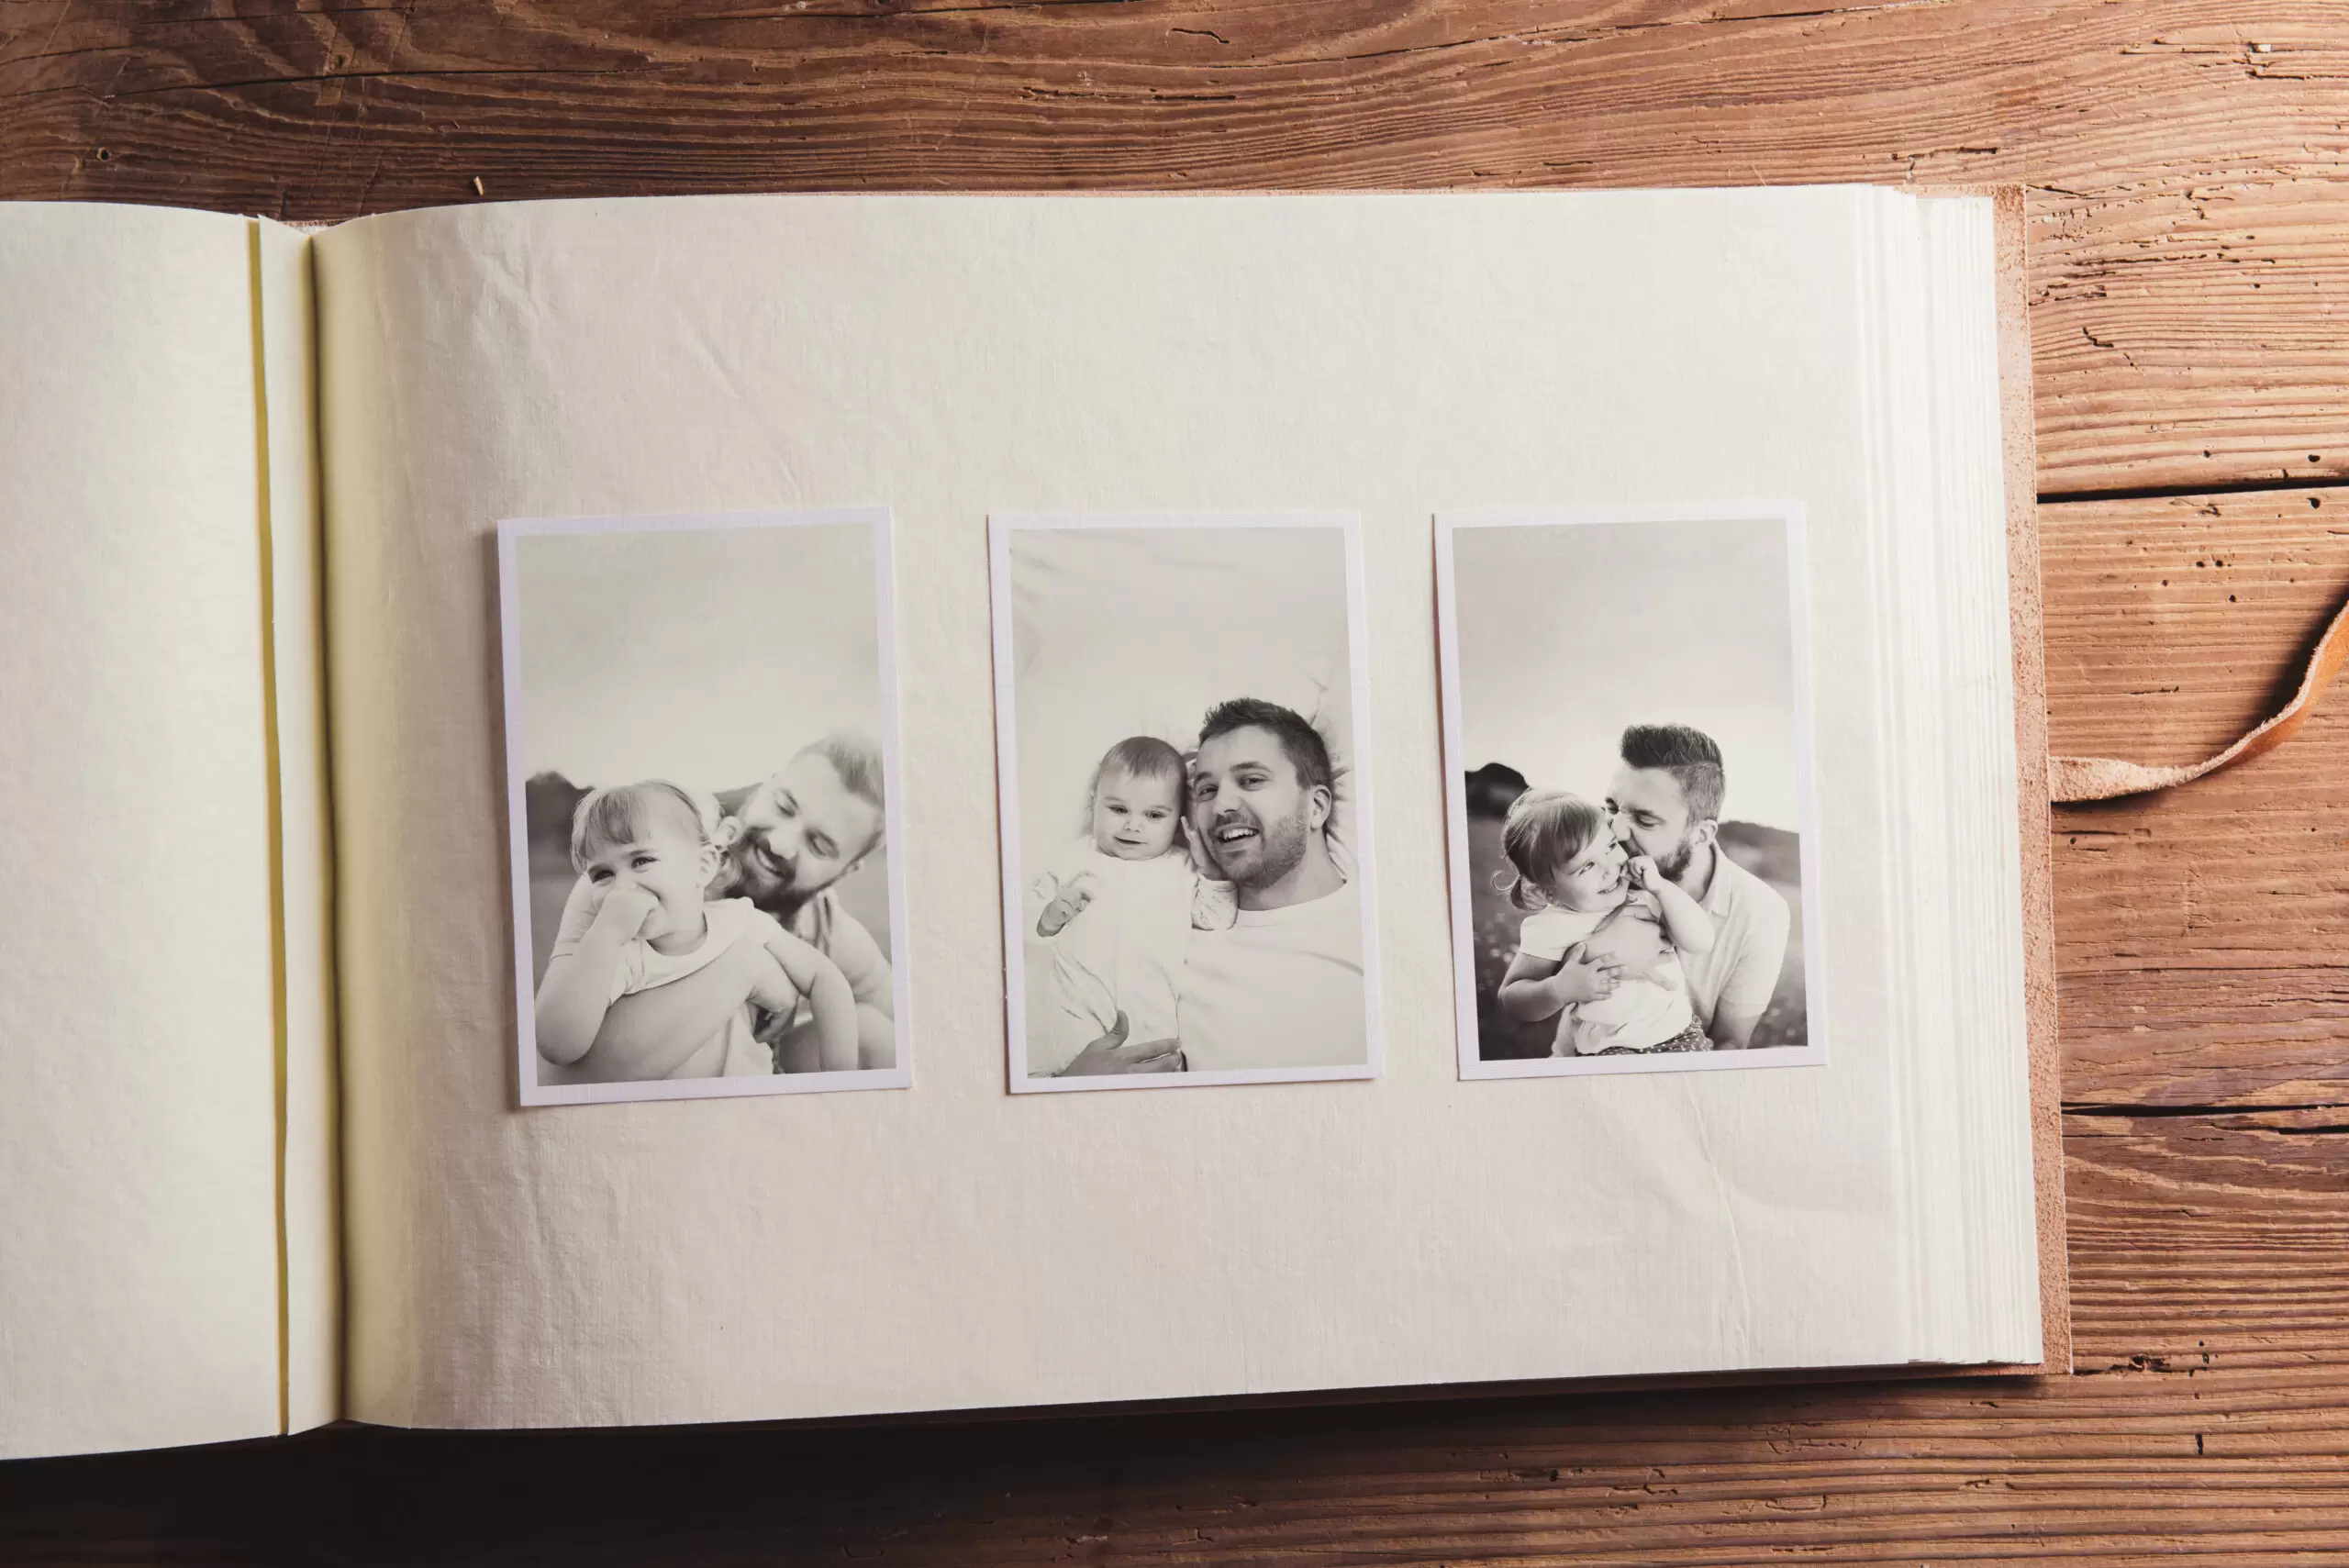 graphicstock-photo-album-with-black-and-white-family-pictures-studio-shot-on-wooden-background_SAliVMhp-W-scaled